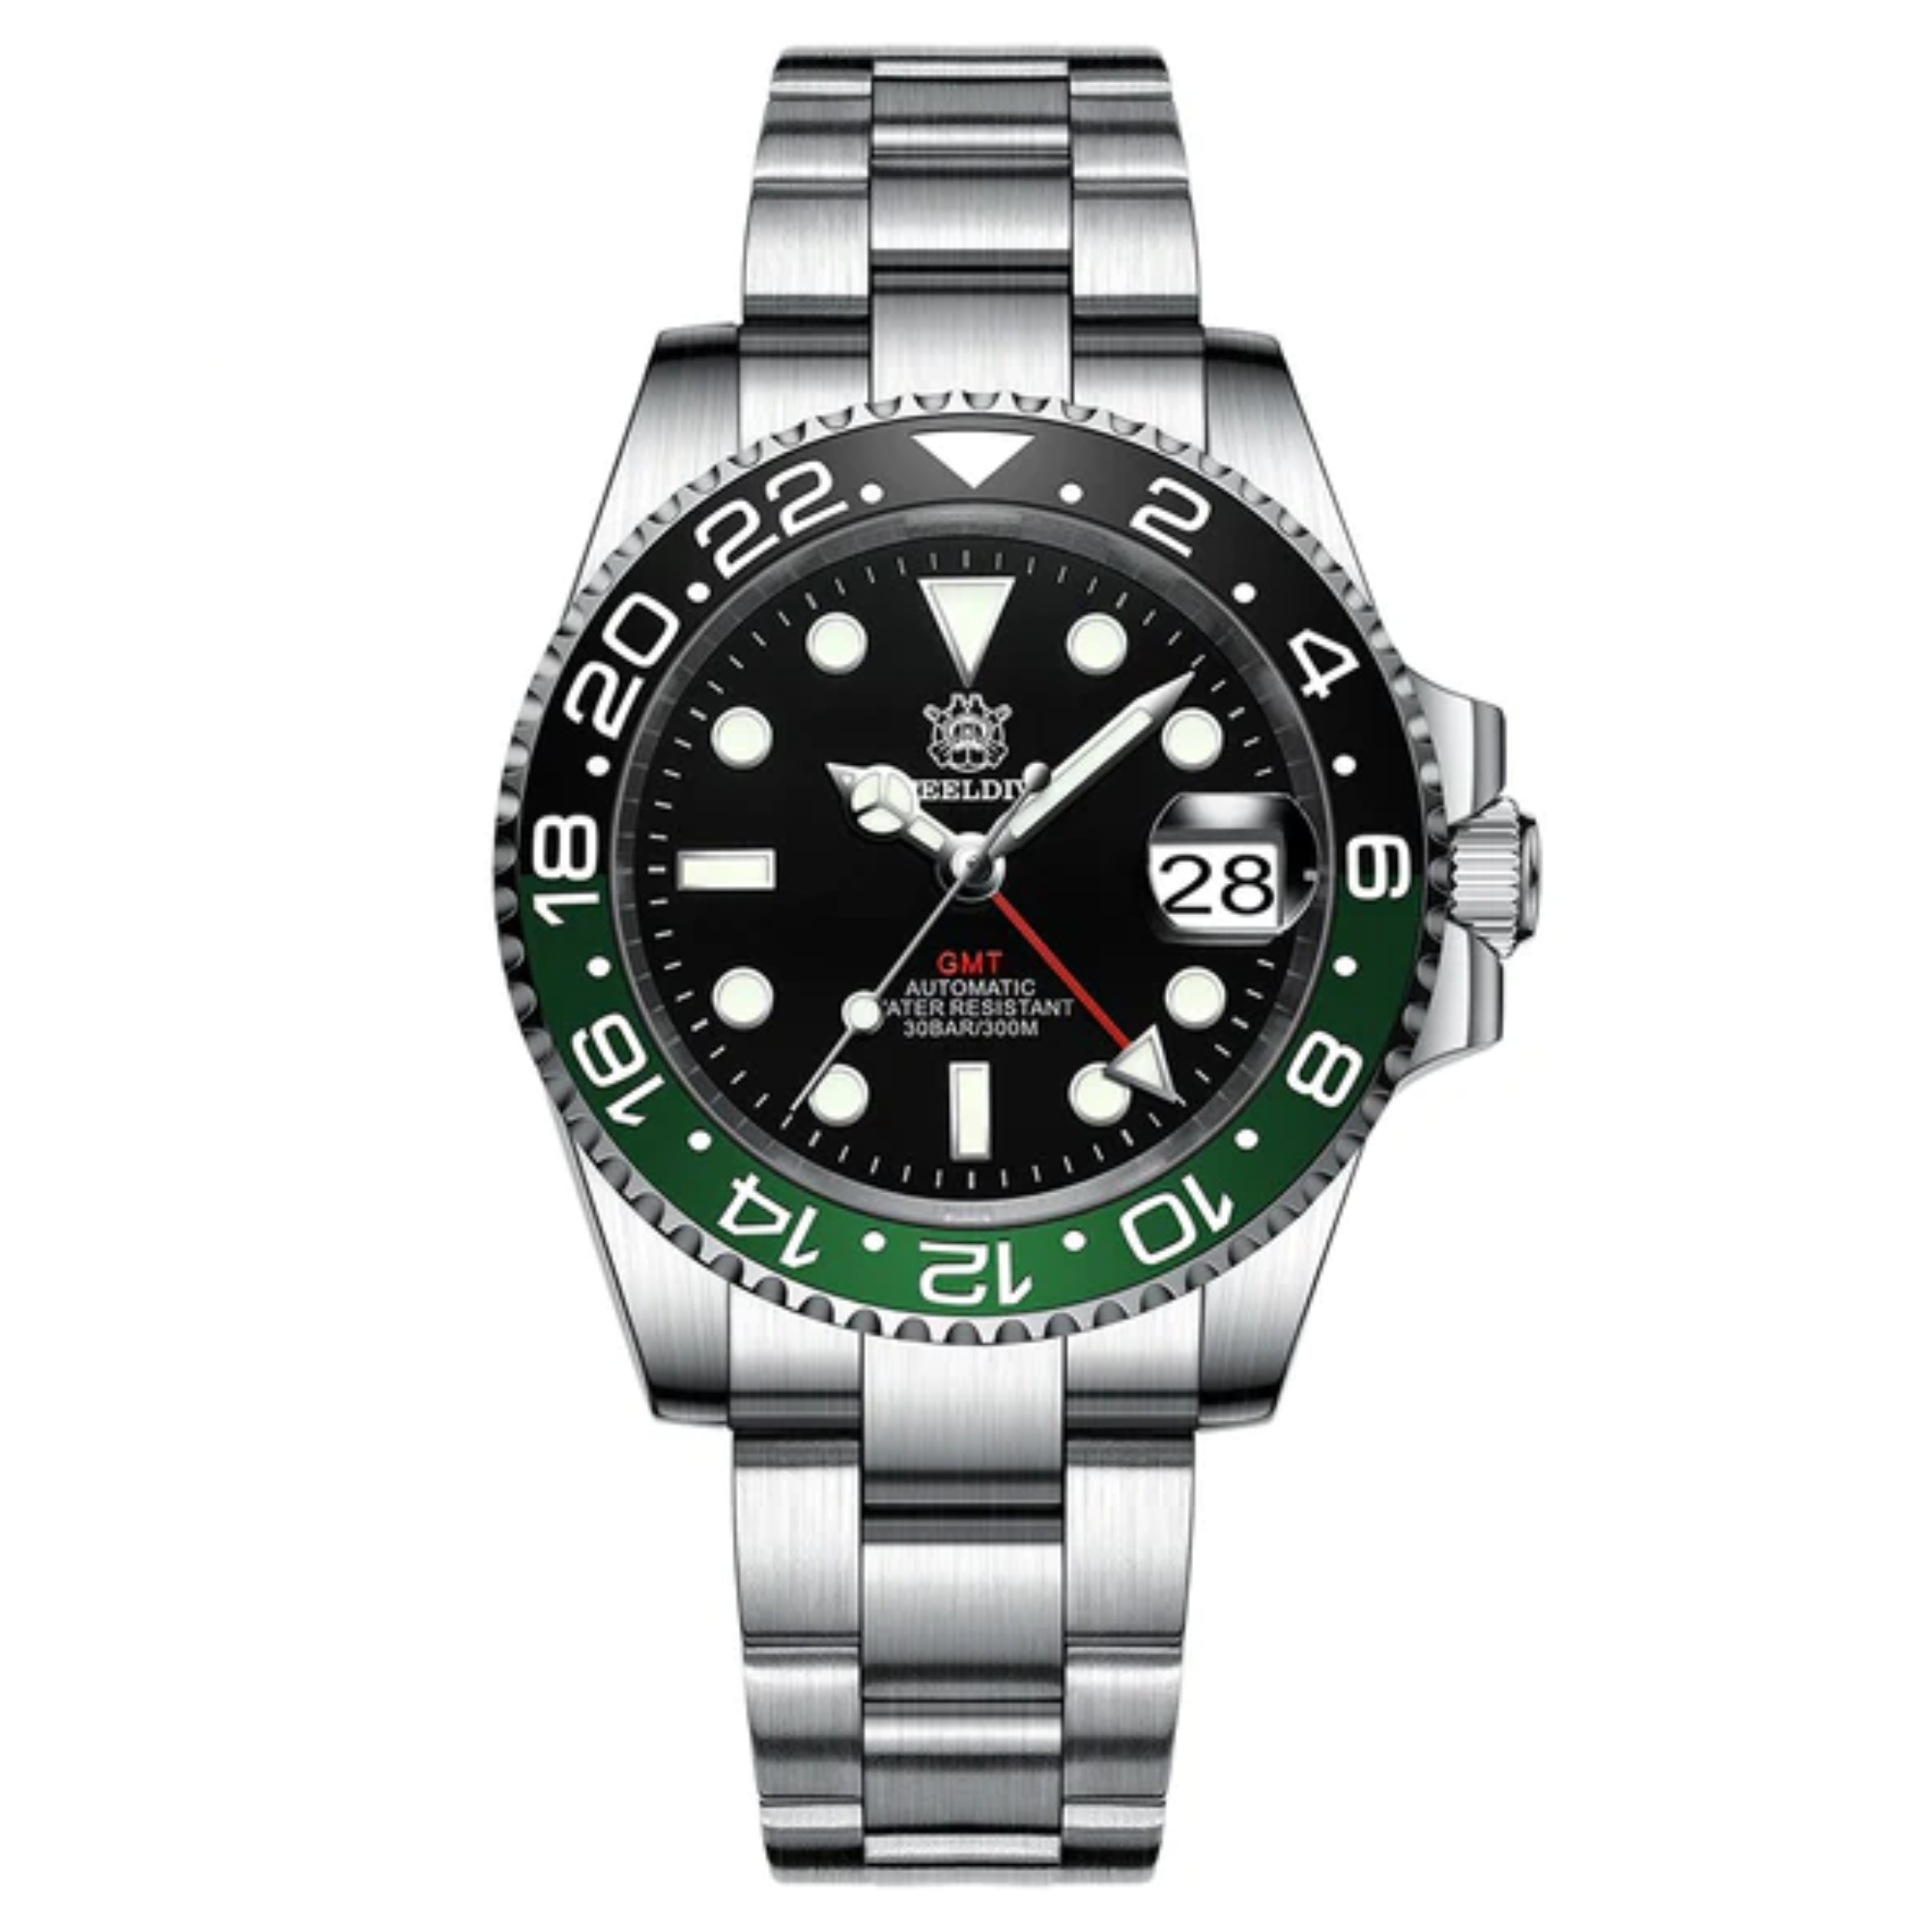 Steeldive SD1993 NH34 GMT Automatic Watch V2 Green/Black Dial With Oyster Bracelet